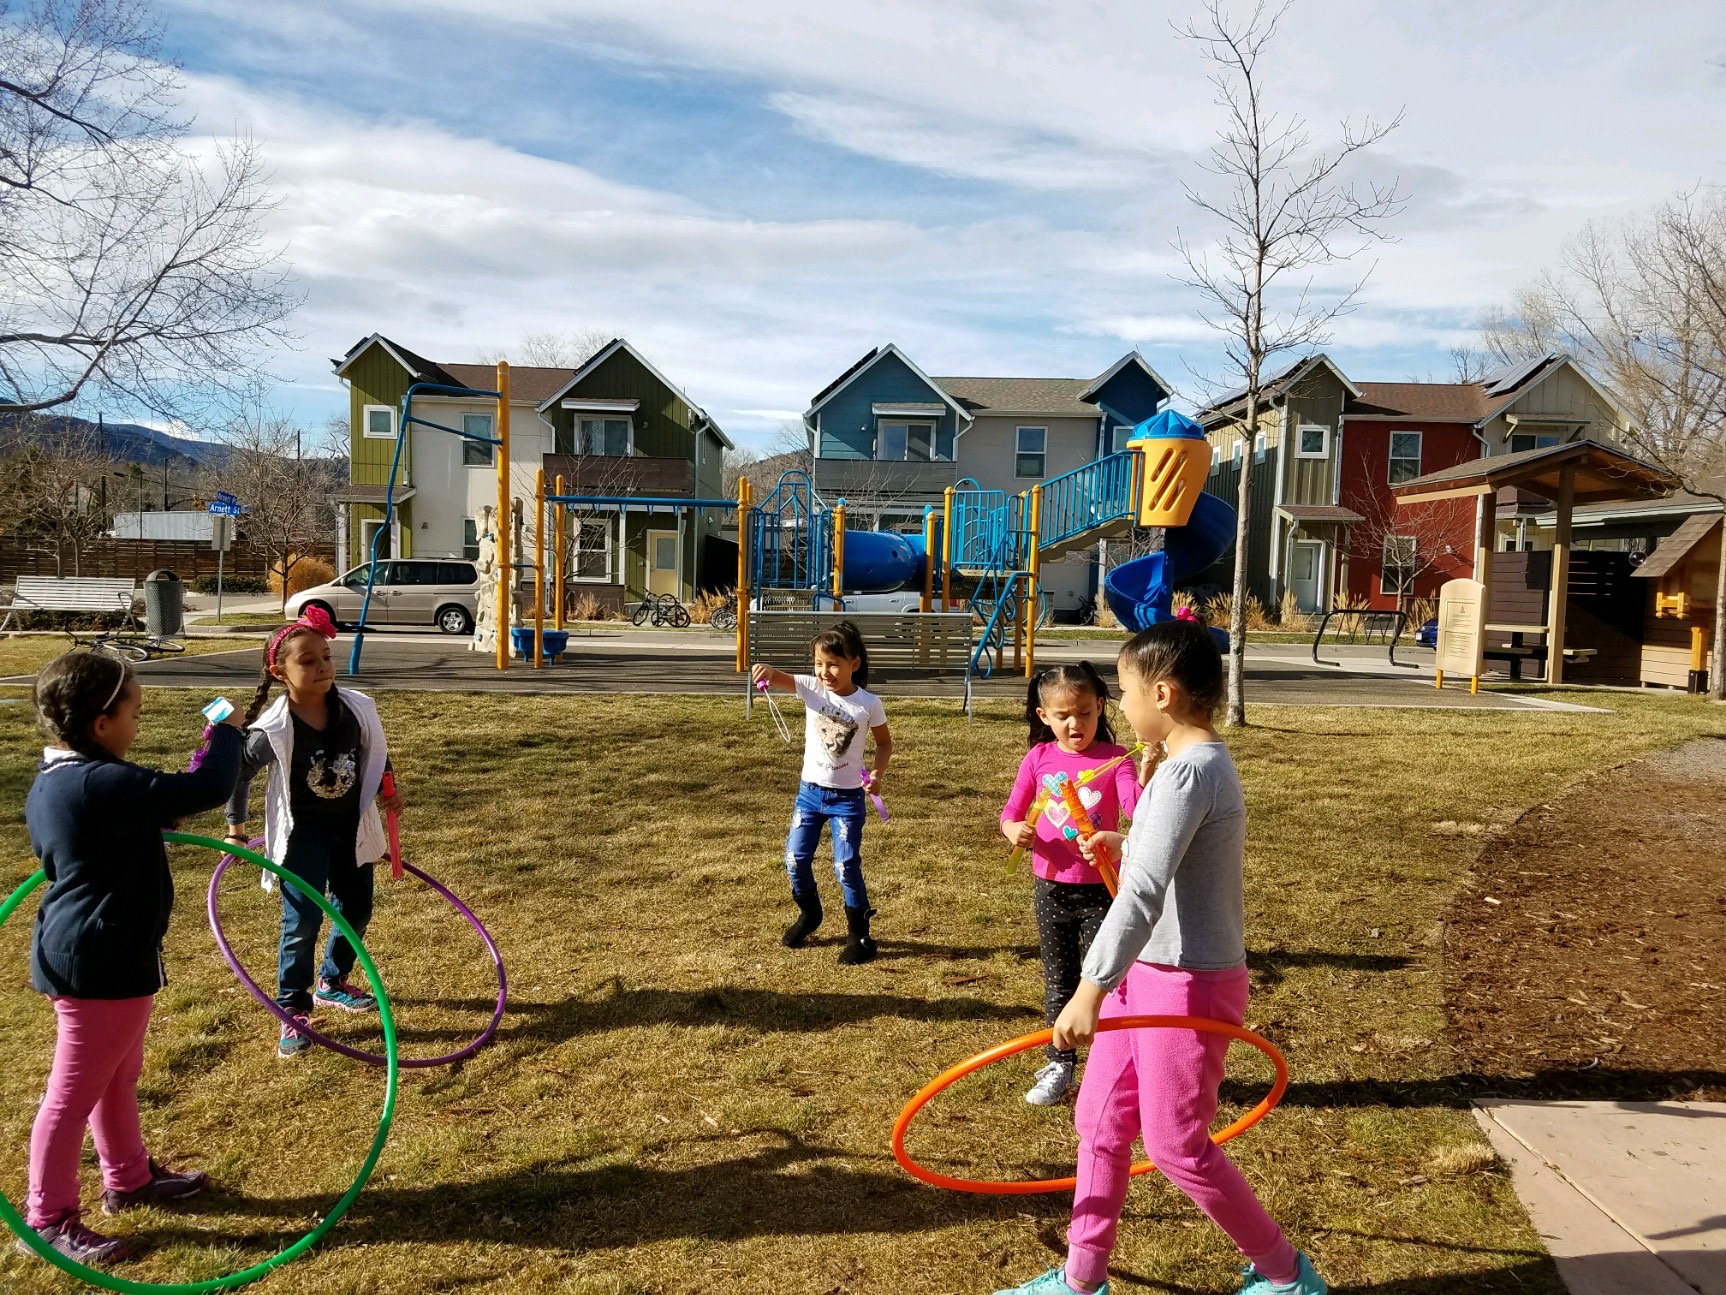 A group of girls play with hula hoops in front of a playground.